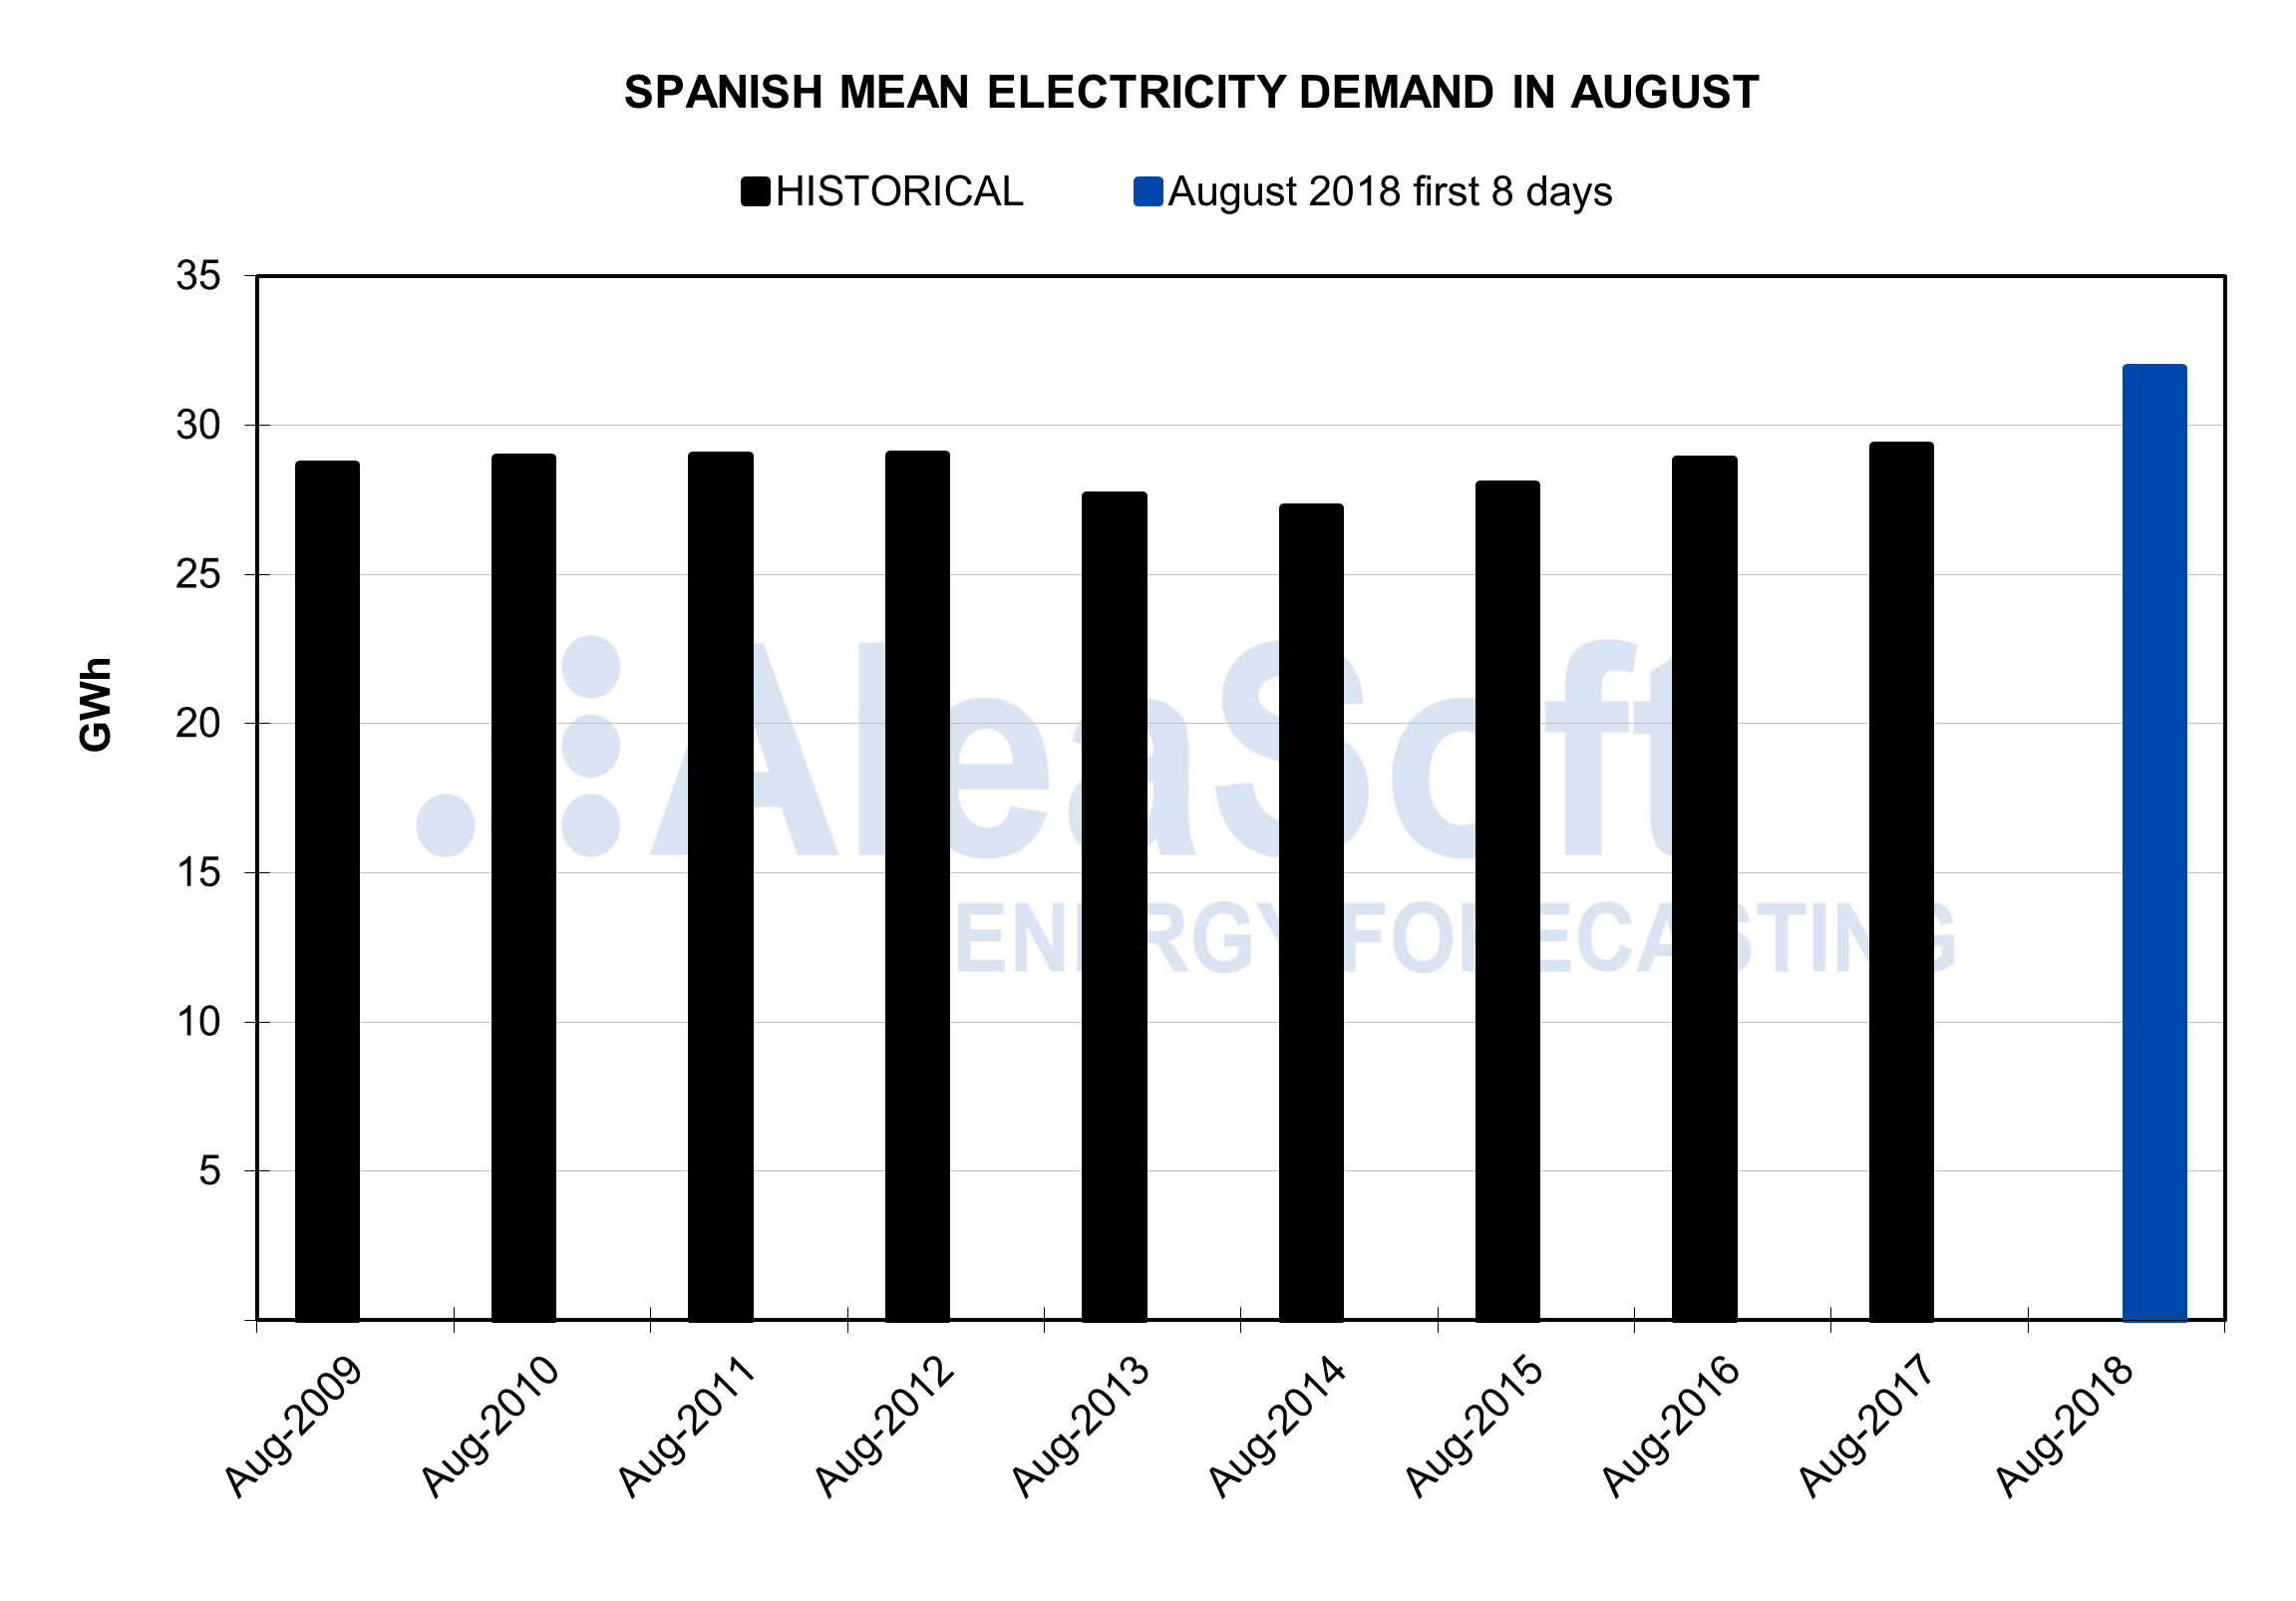 AleaSoft - Spanish mean electricity demand in August